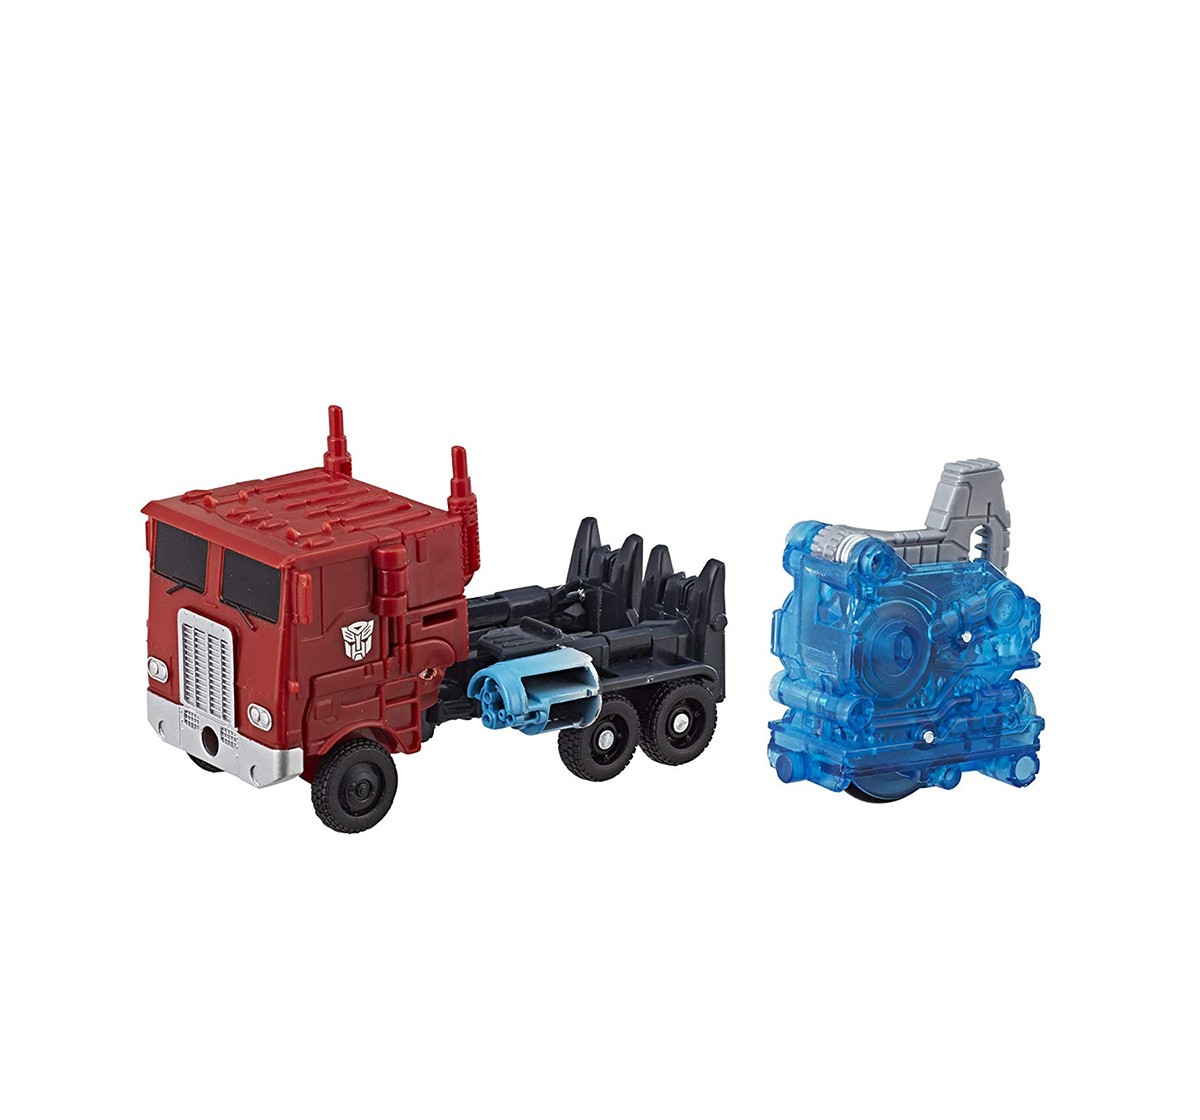 Transformers, Bumblebee Movie Toys, Energon Igniters Power Plus Series Optimus Prime Action Figures for Kids age 5Y+ 